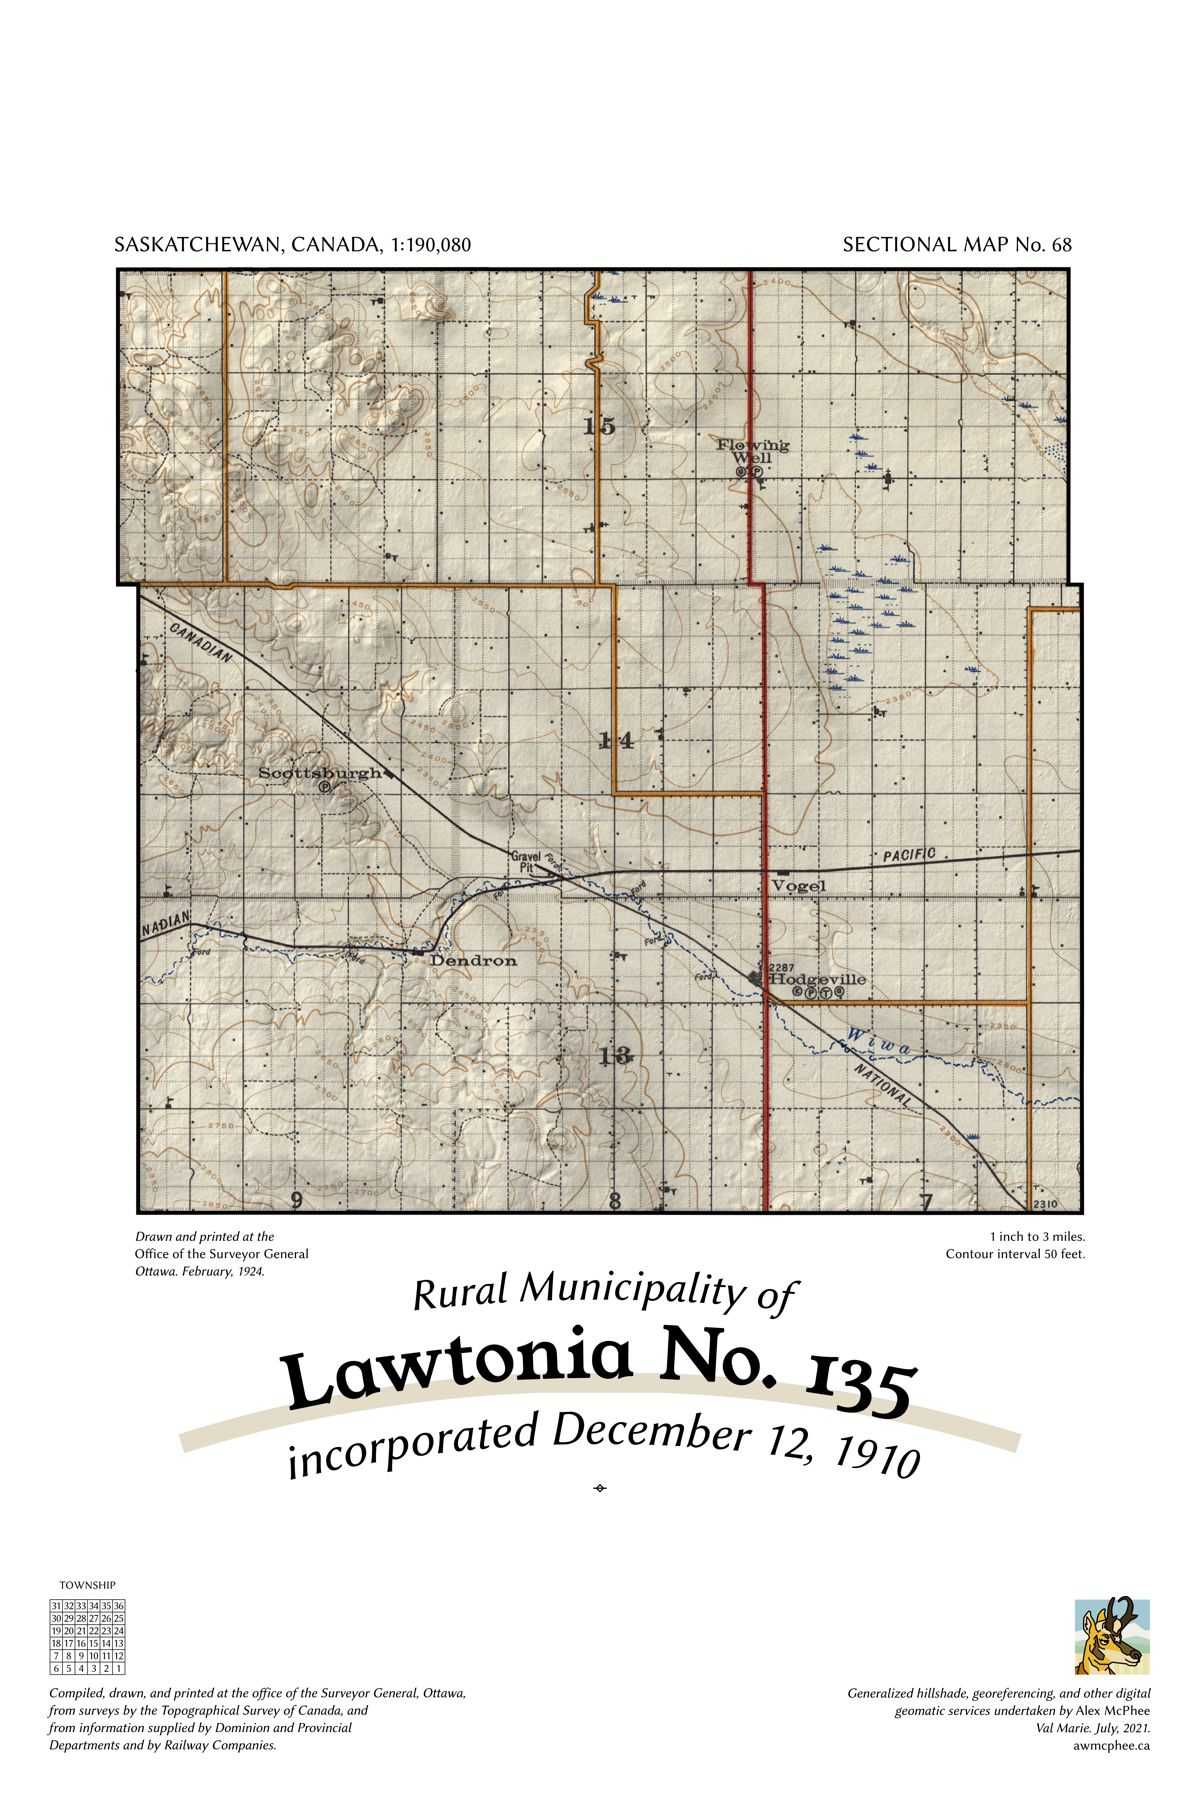 A map of the Rural Municipality of Lawtonia No. 135.